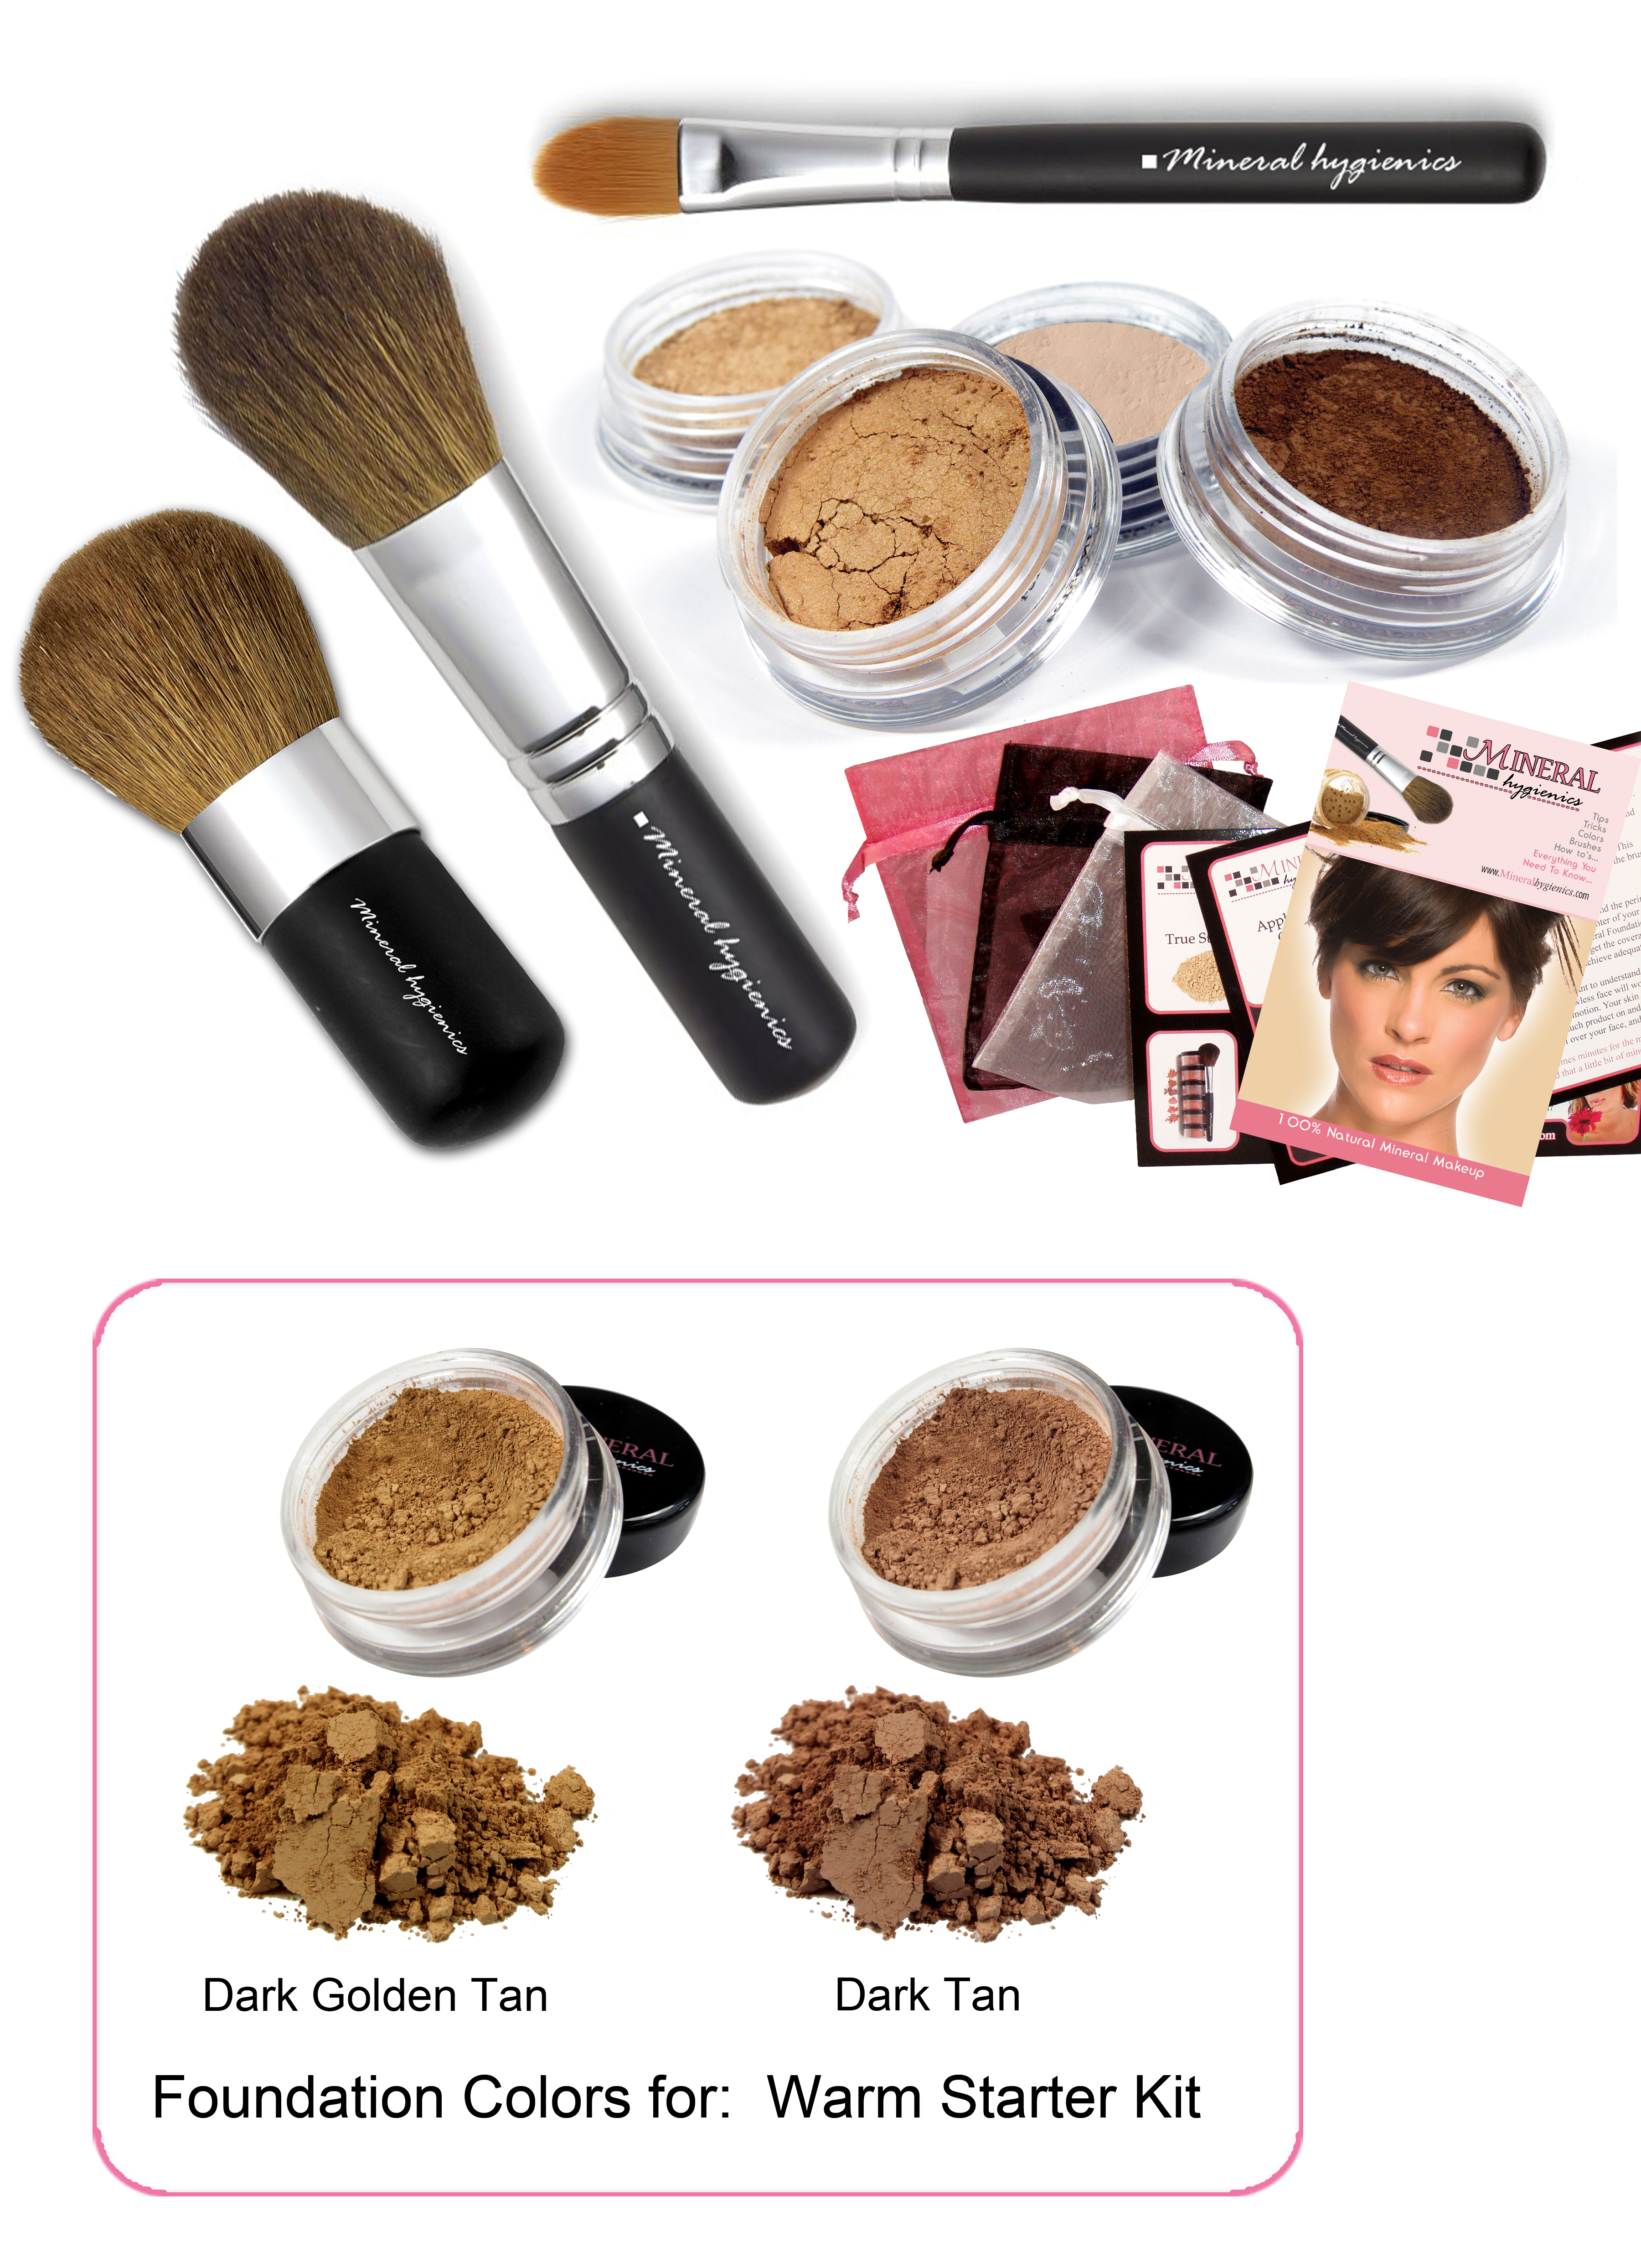 Learn more about the Warm Skin Tone Mineral Makeup Starter Kit